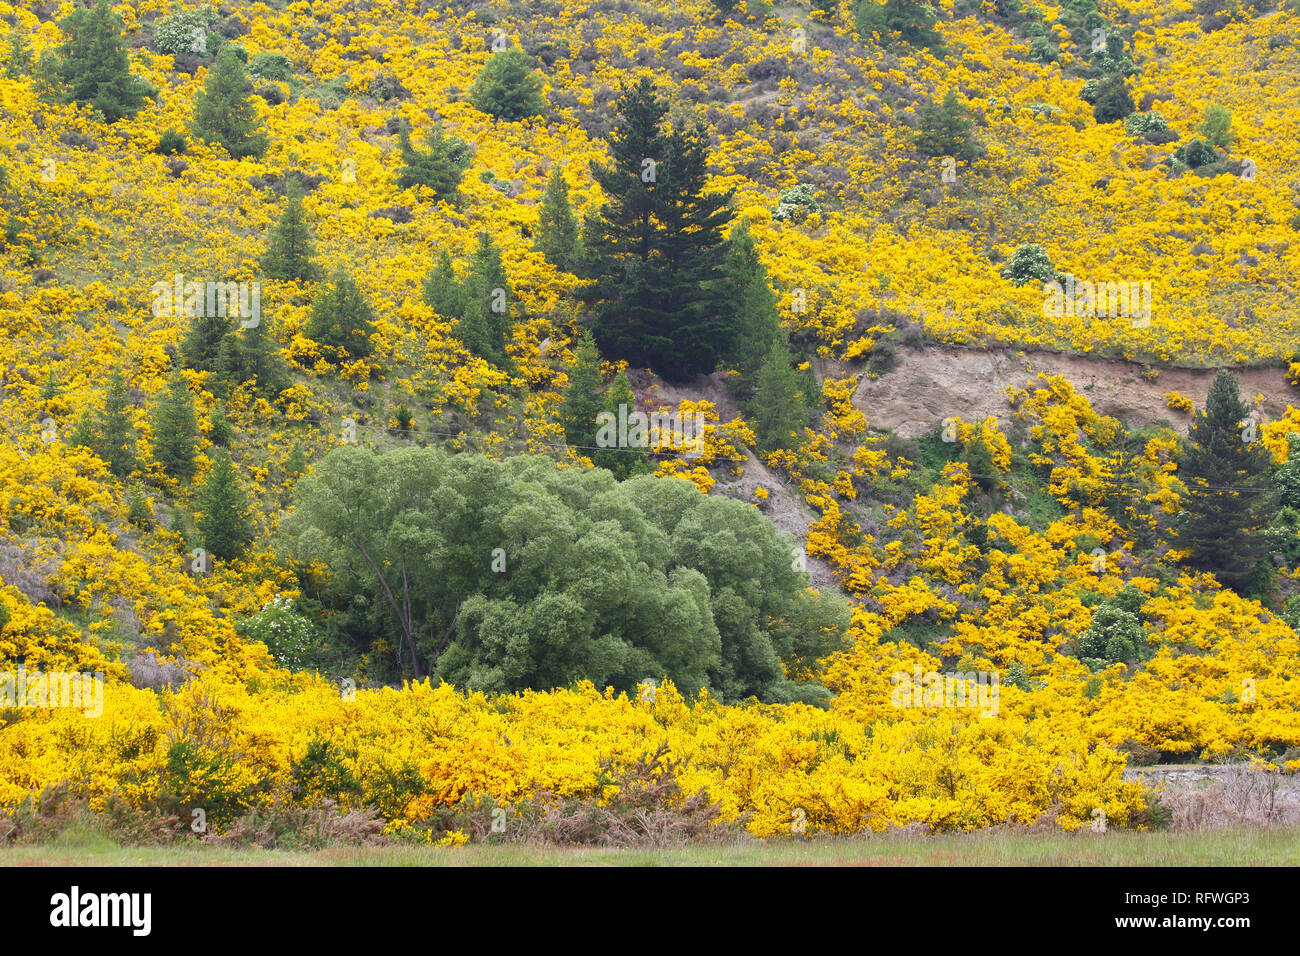 Common broom in bloom on the South Island of New Zealand. Lake Tekapo, South Island, New Zealand Stock Photo